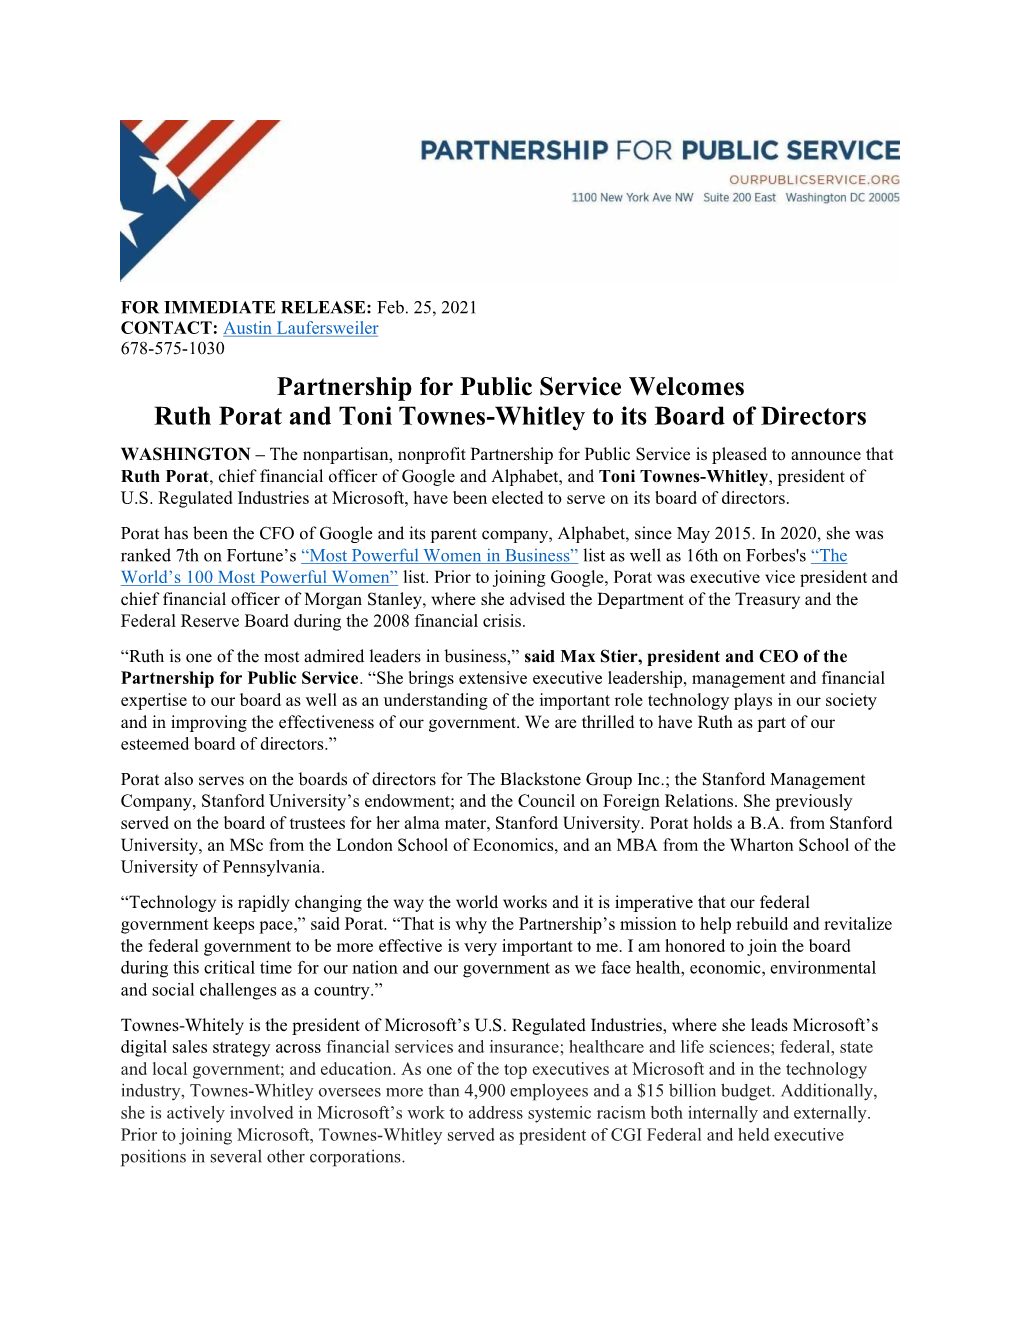 Partnership for Public Service Welcomes Ruth Porat and Toni Townes-Whitley to Its Board of Directors